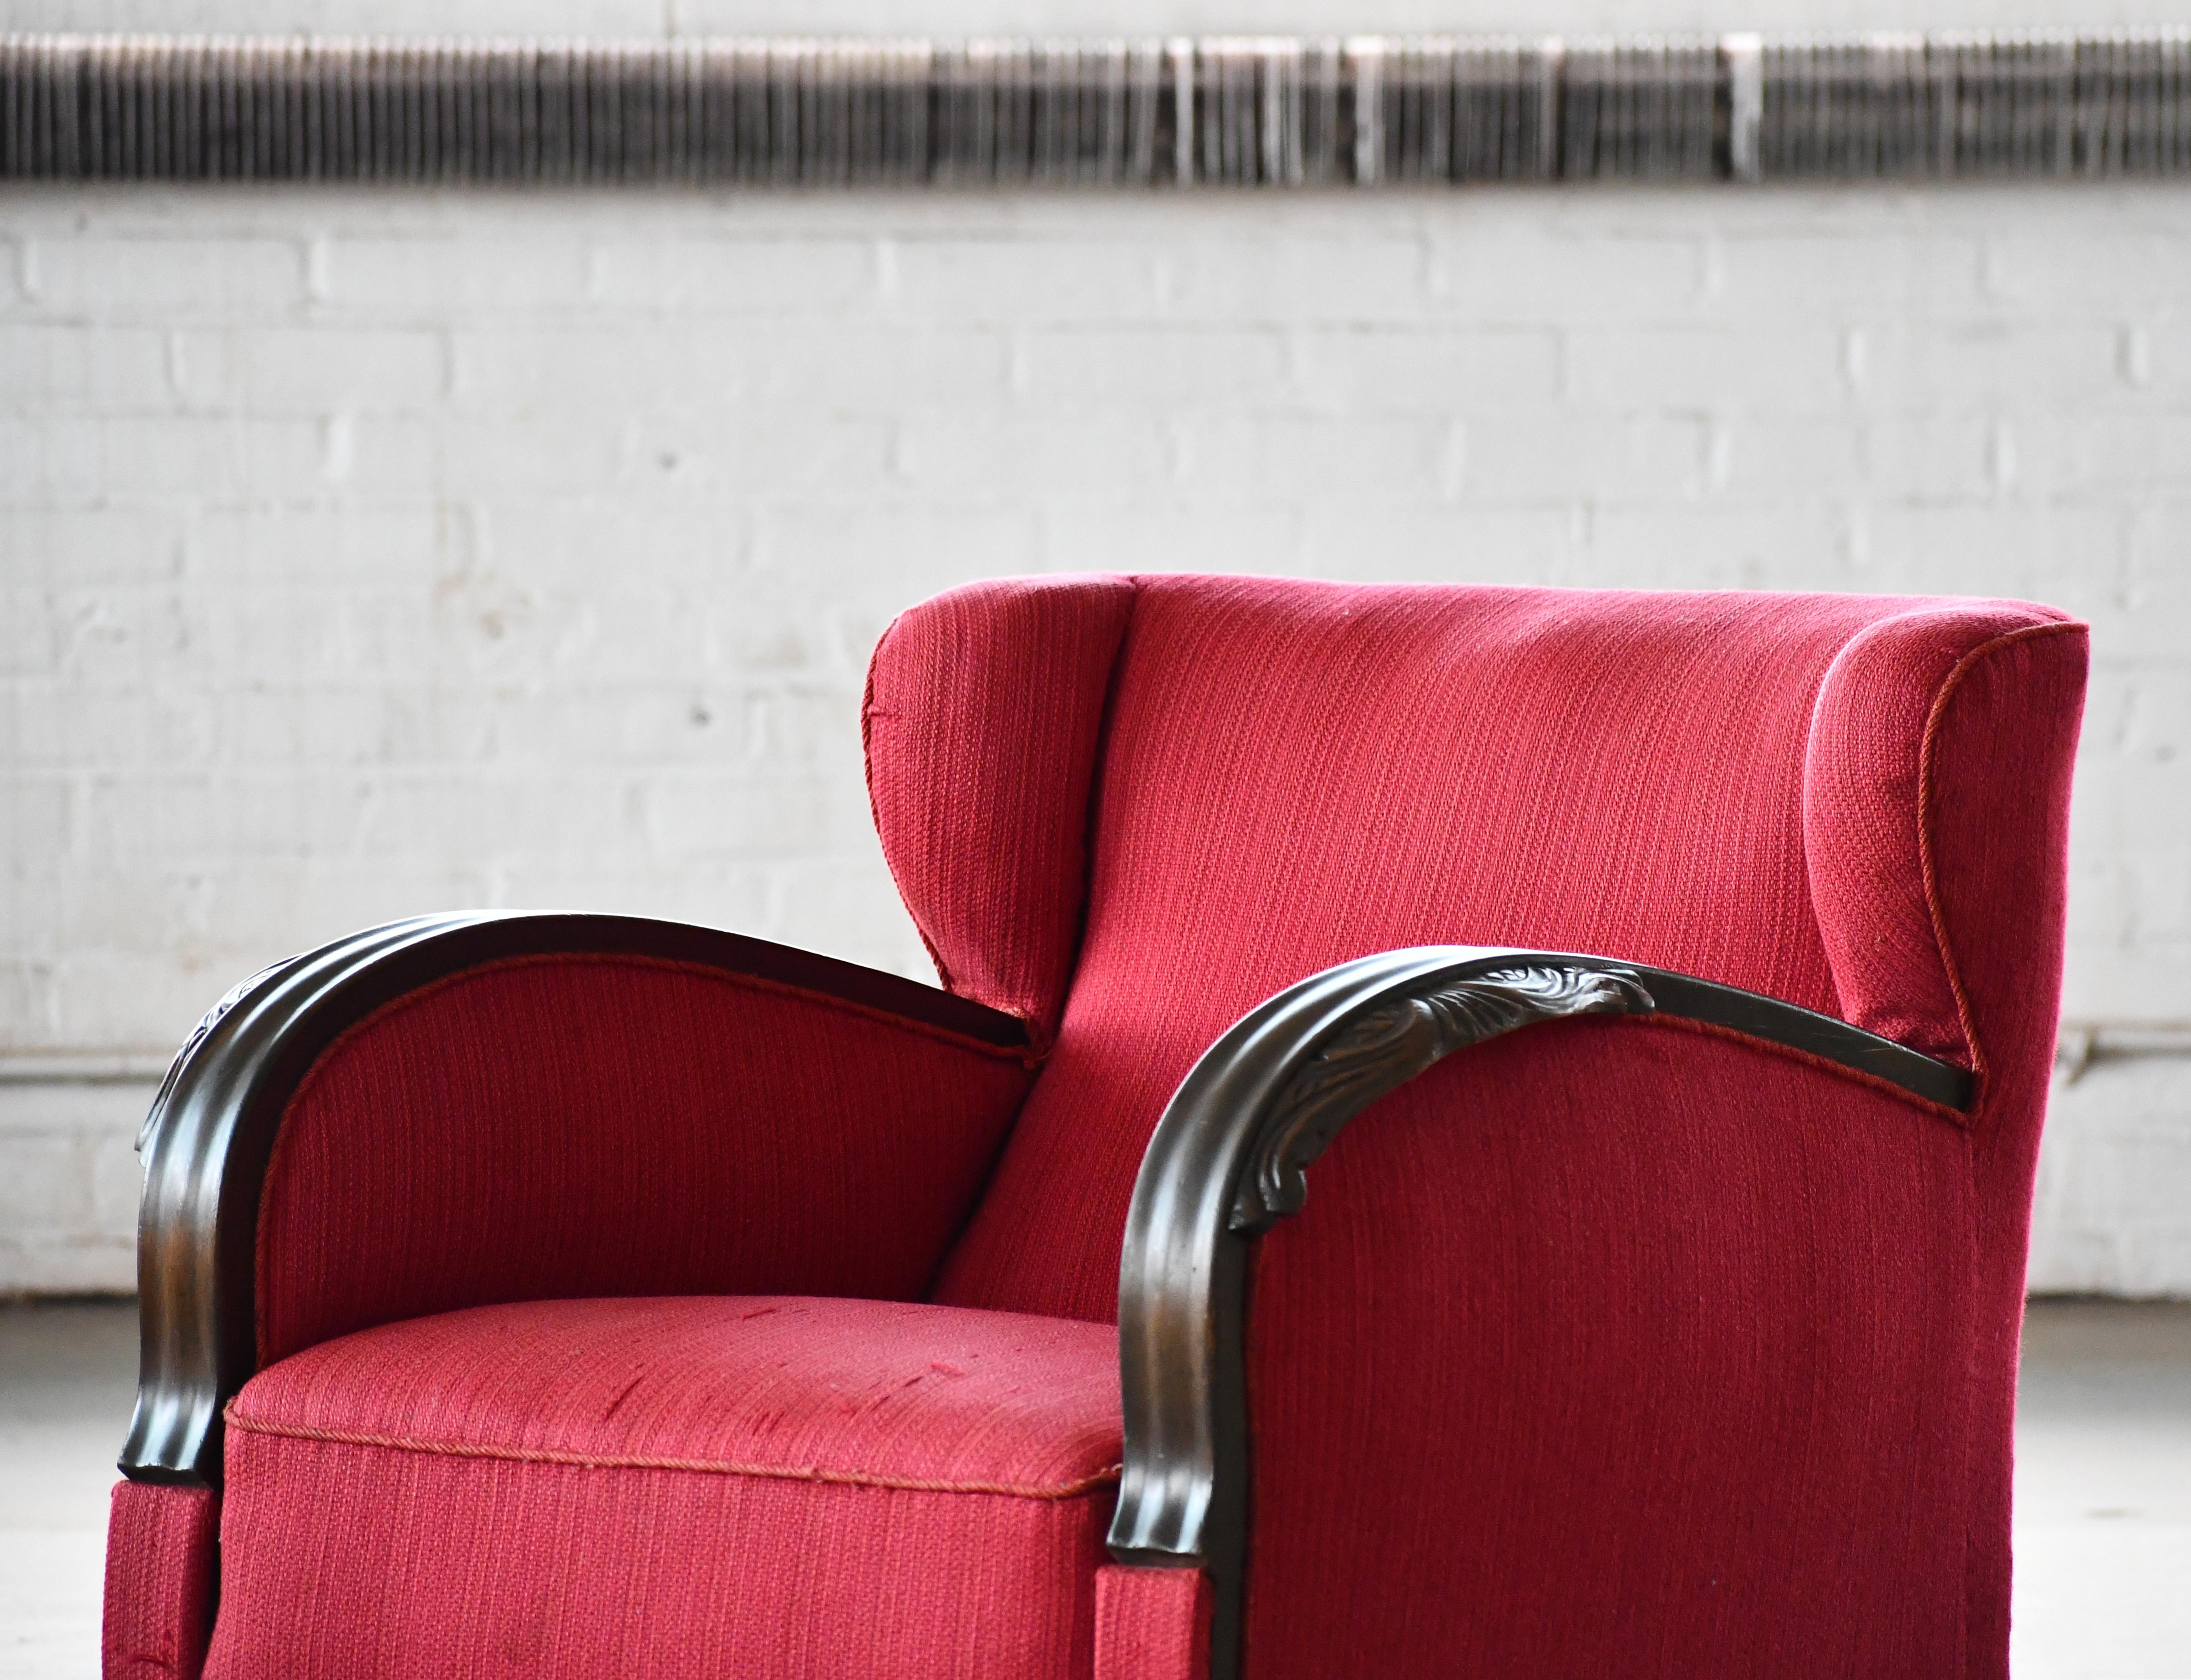 Danish 1930s Art Deco Lounge Chair in Red Mohair with Carved Armrests For Sale 2